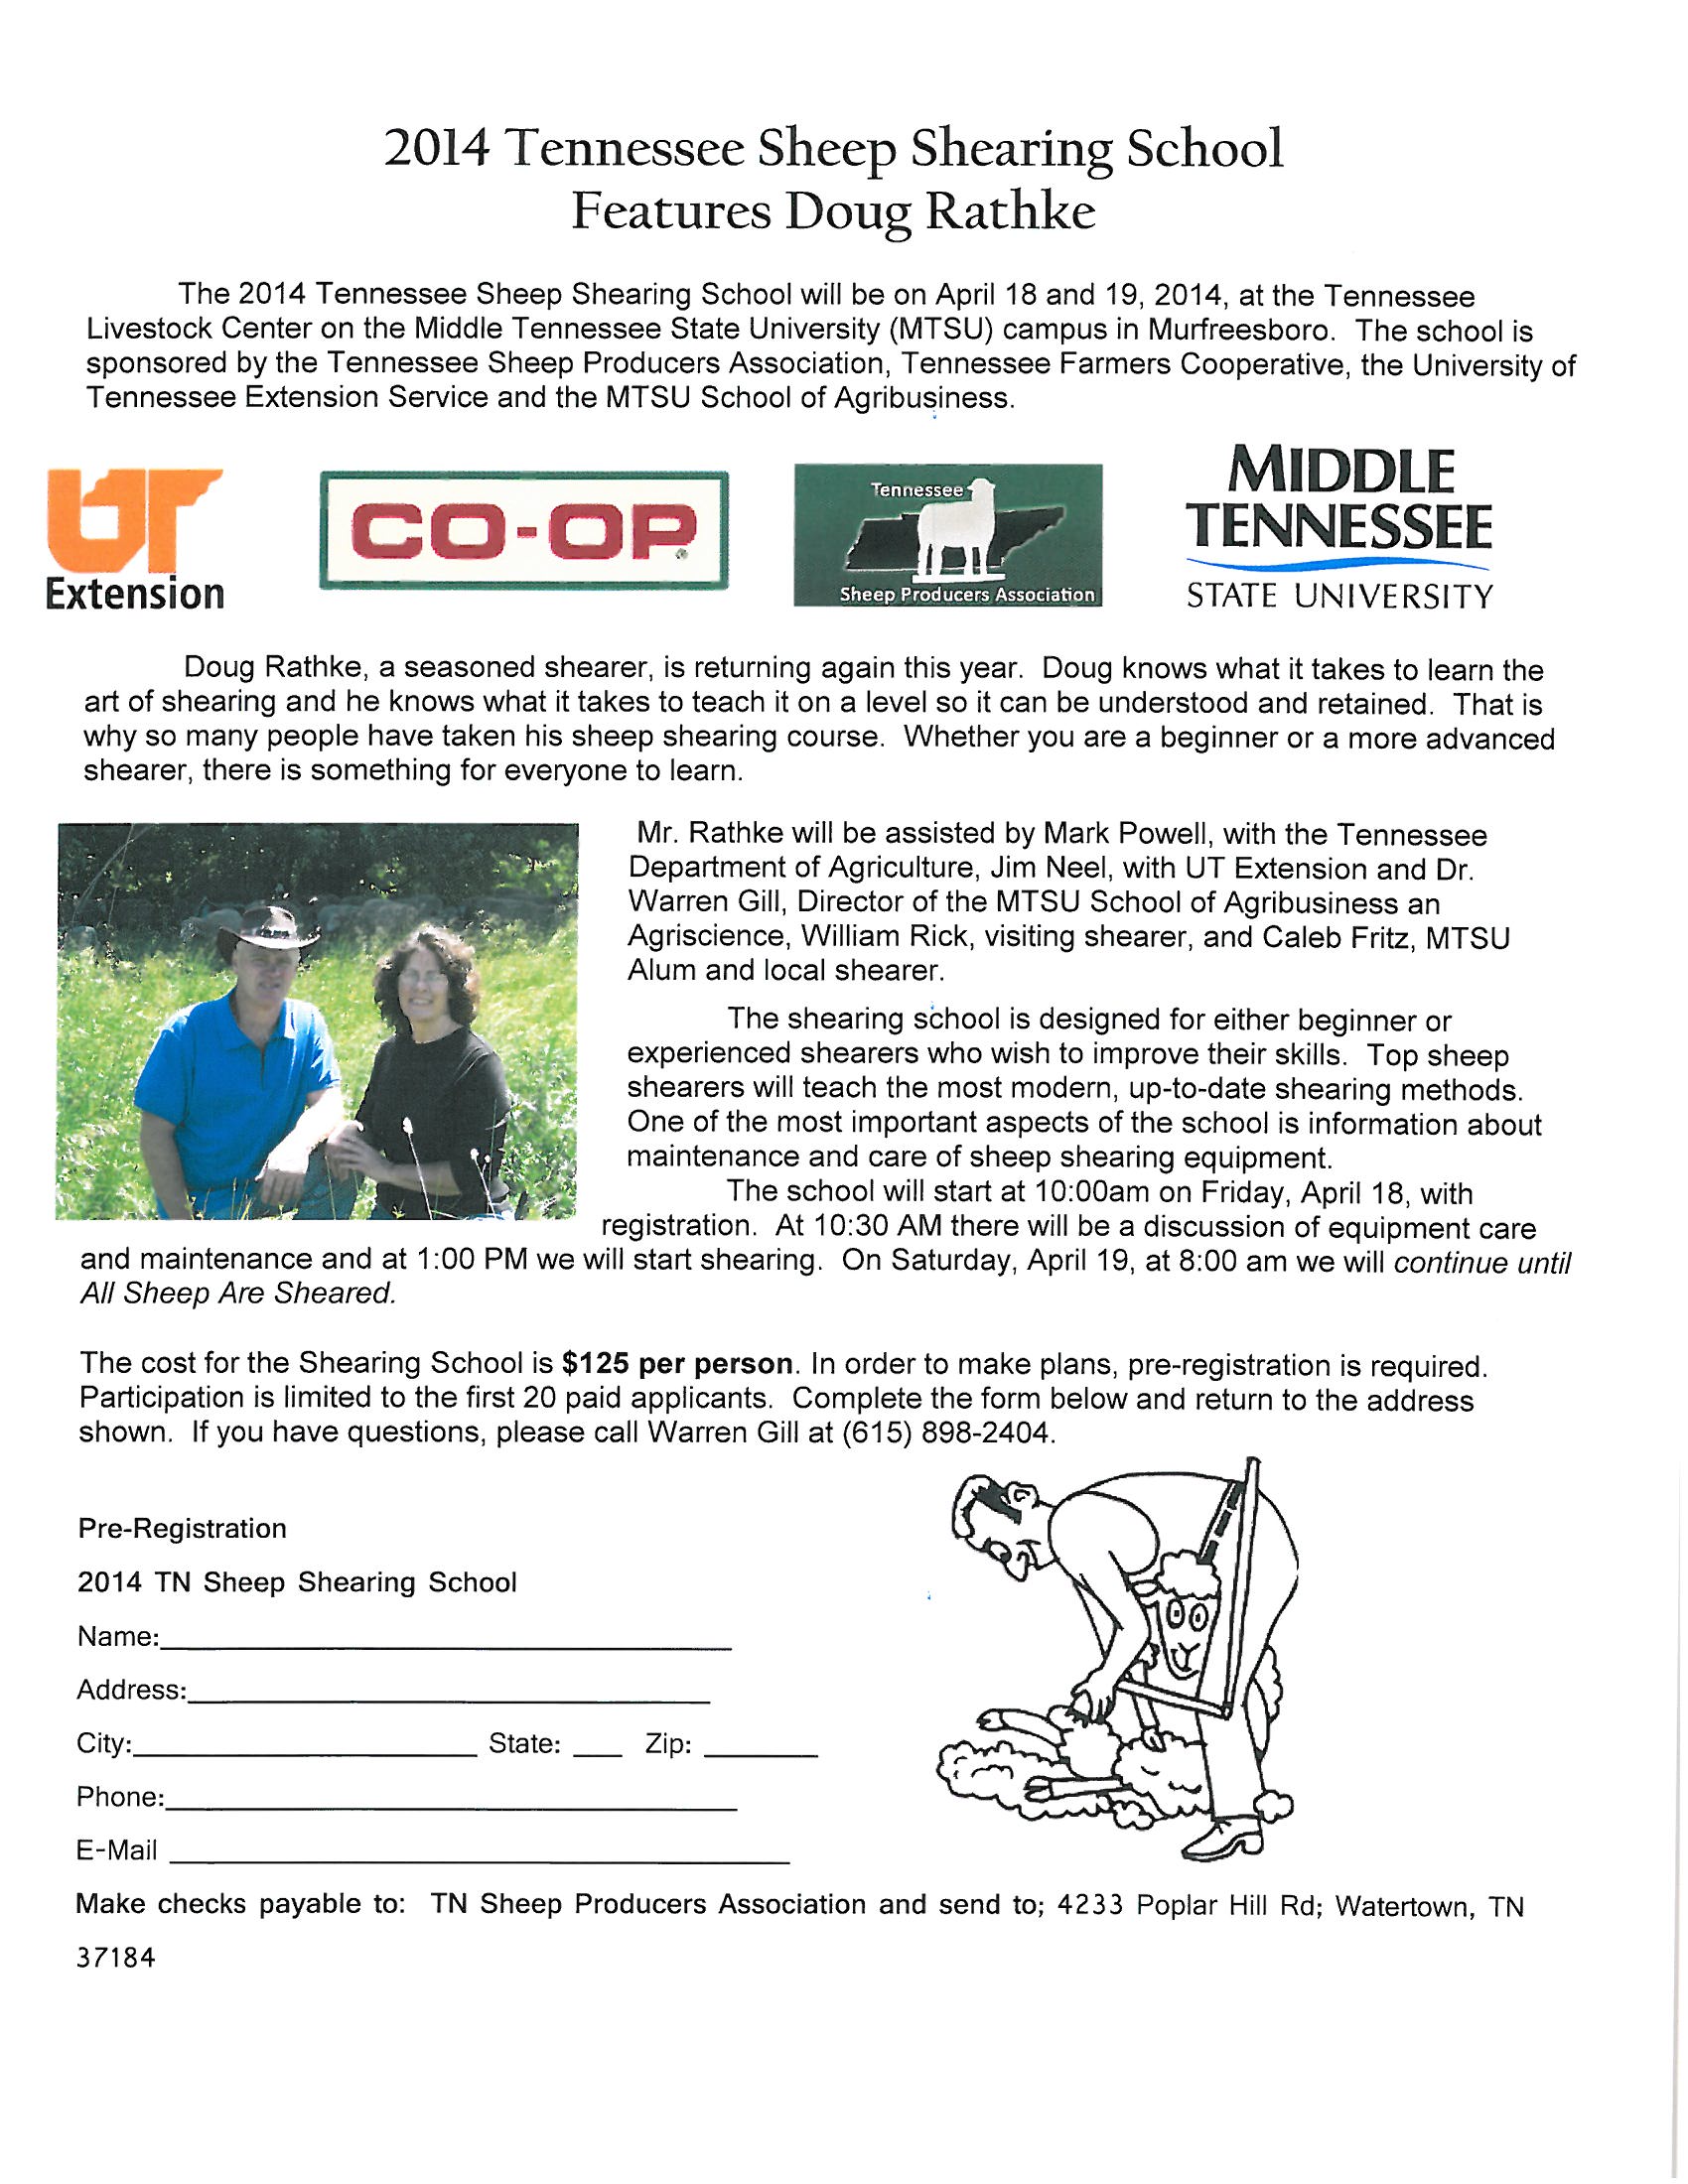  2014 Tennessee Sheep Shearing School Features Doug Rathke